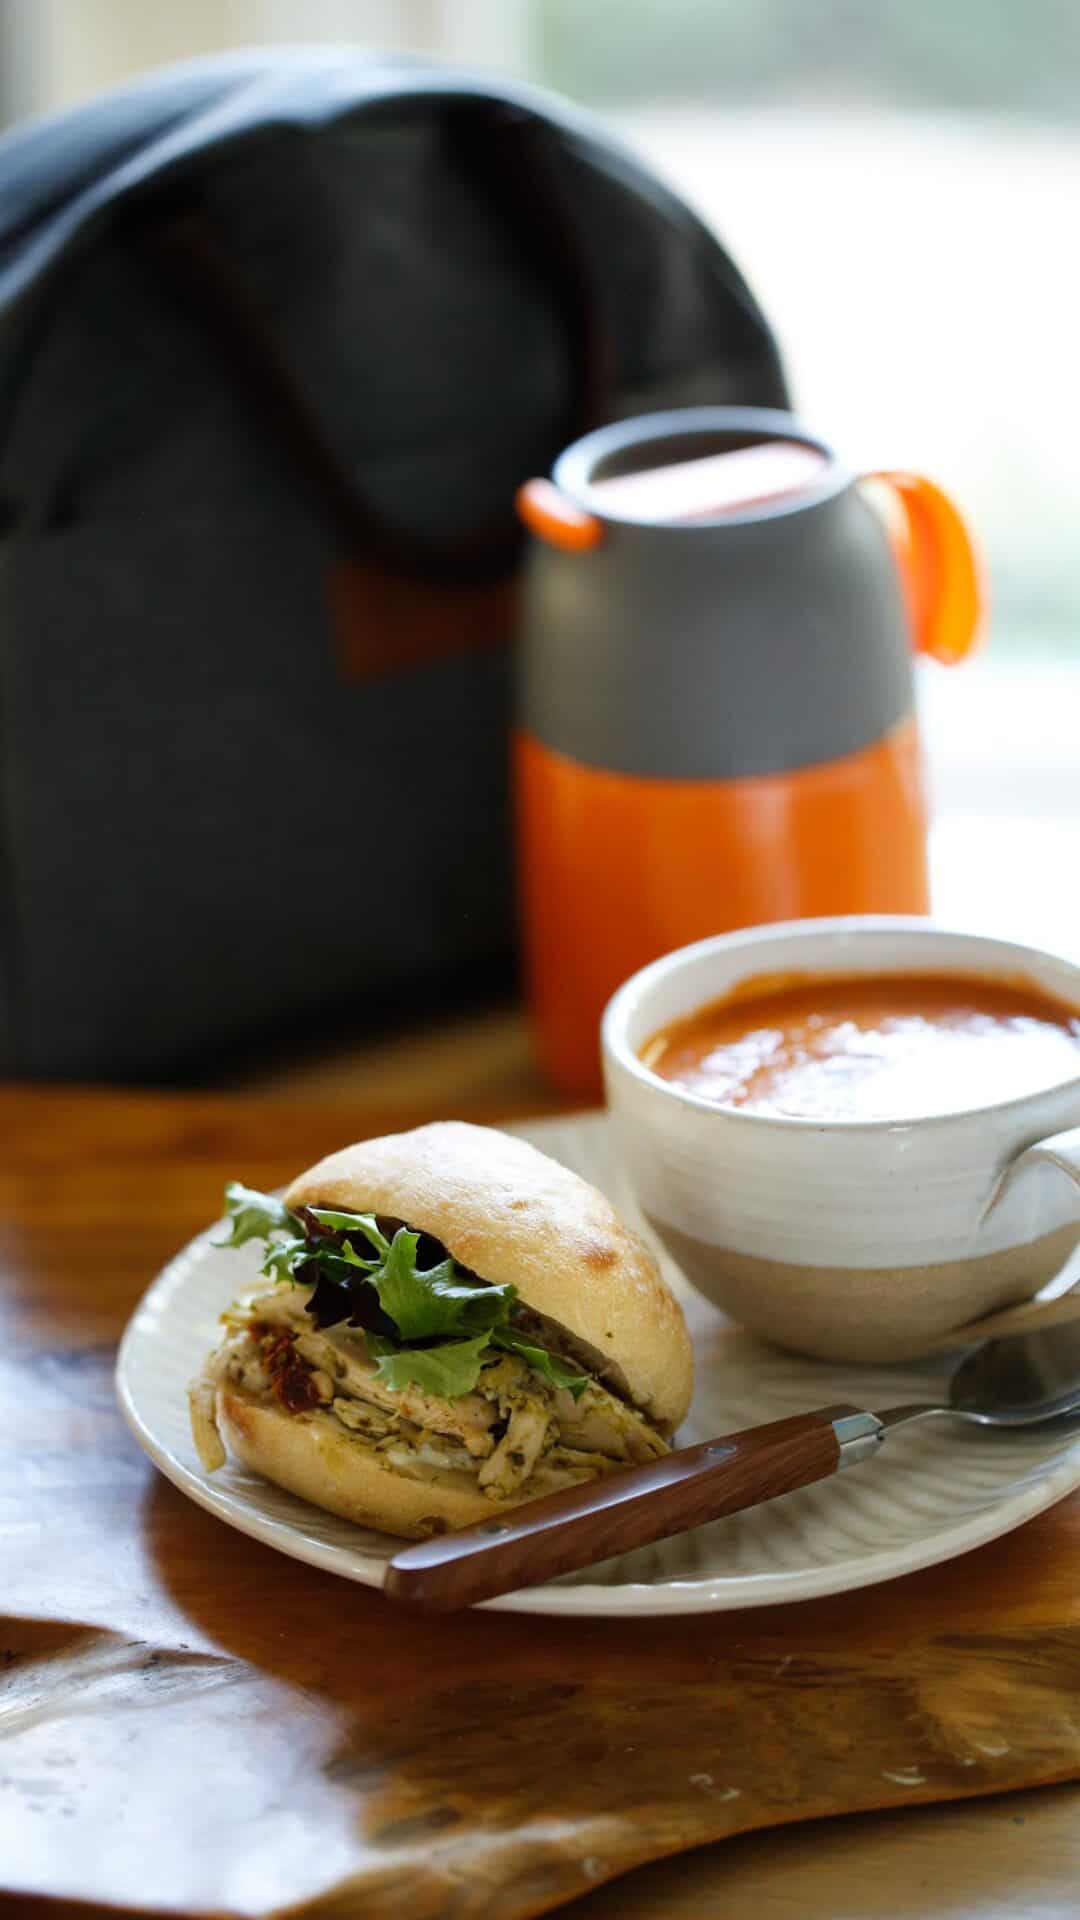 Soup and sandwich on plate with thermos and lunch bag in background